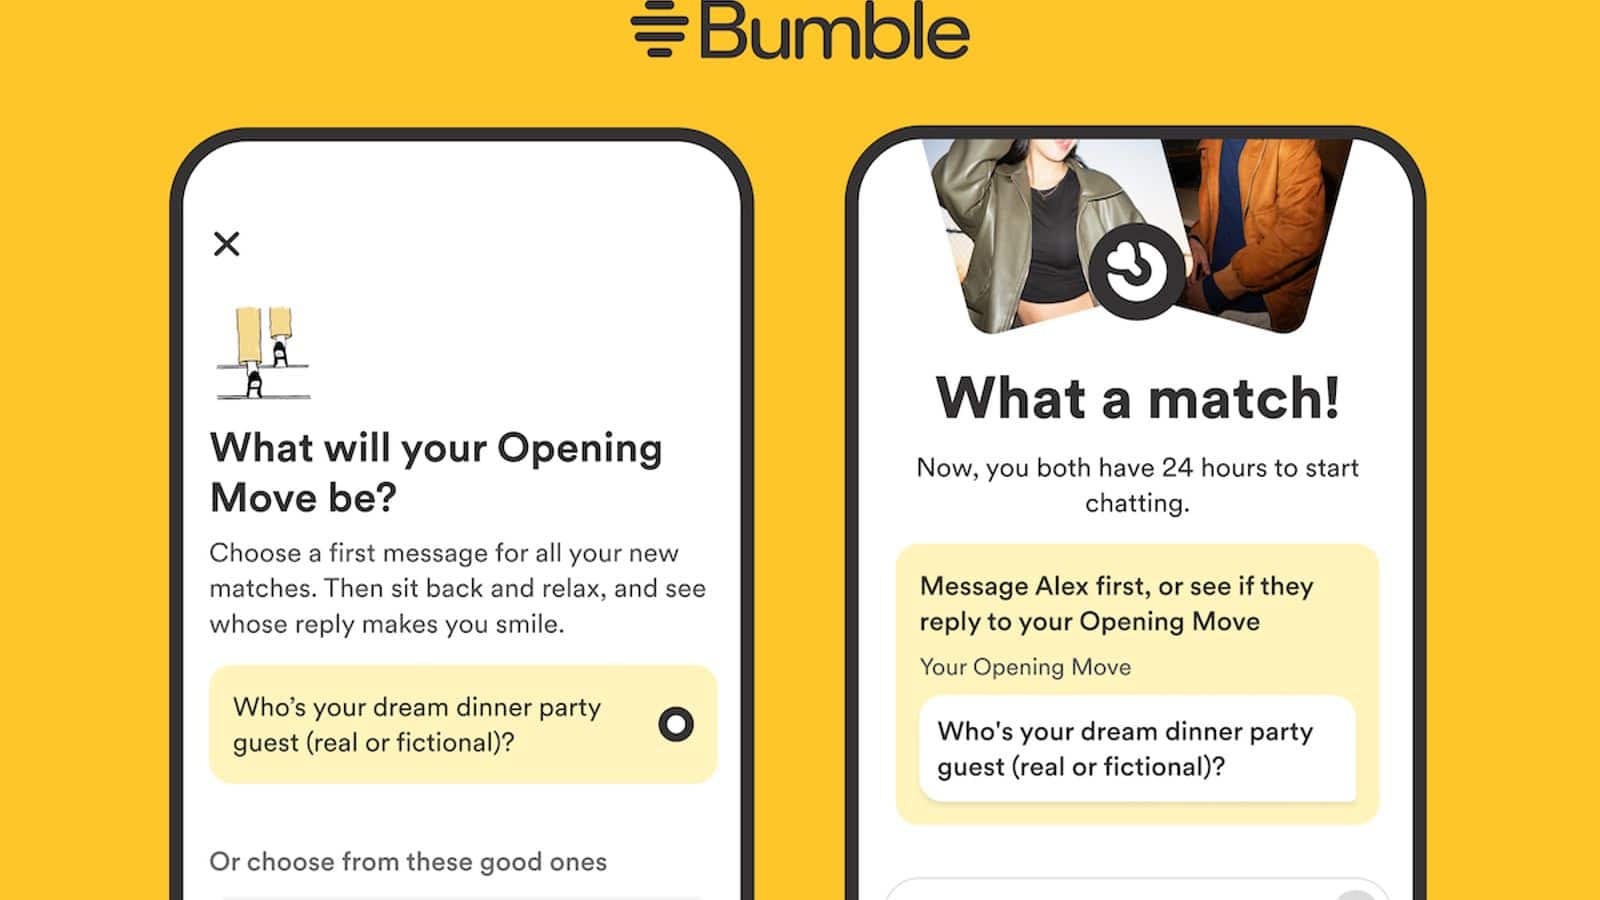 Bumble's new feature aims to streamline messaging for women